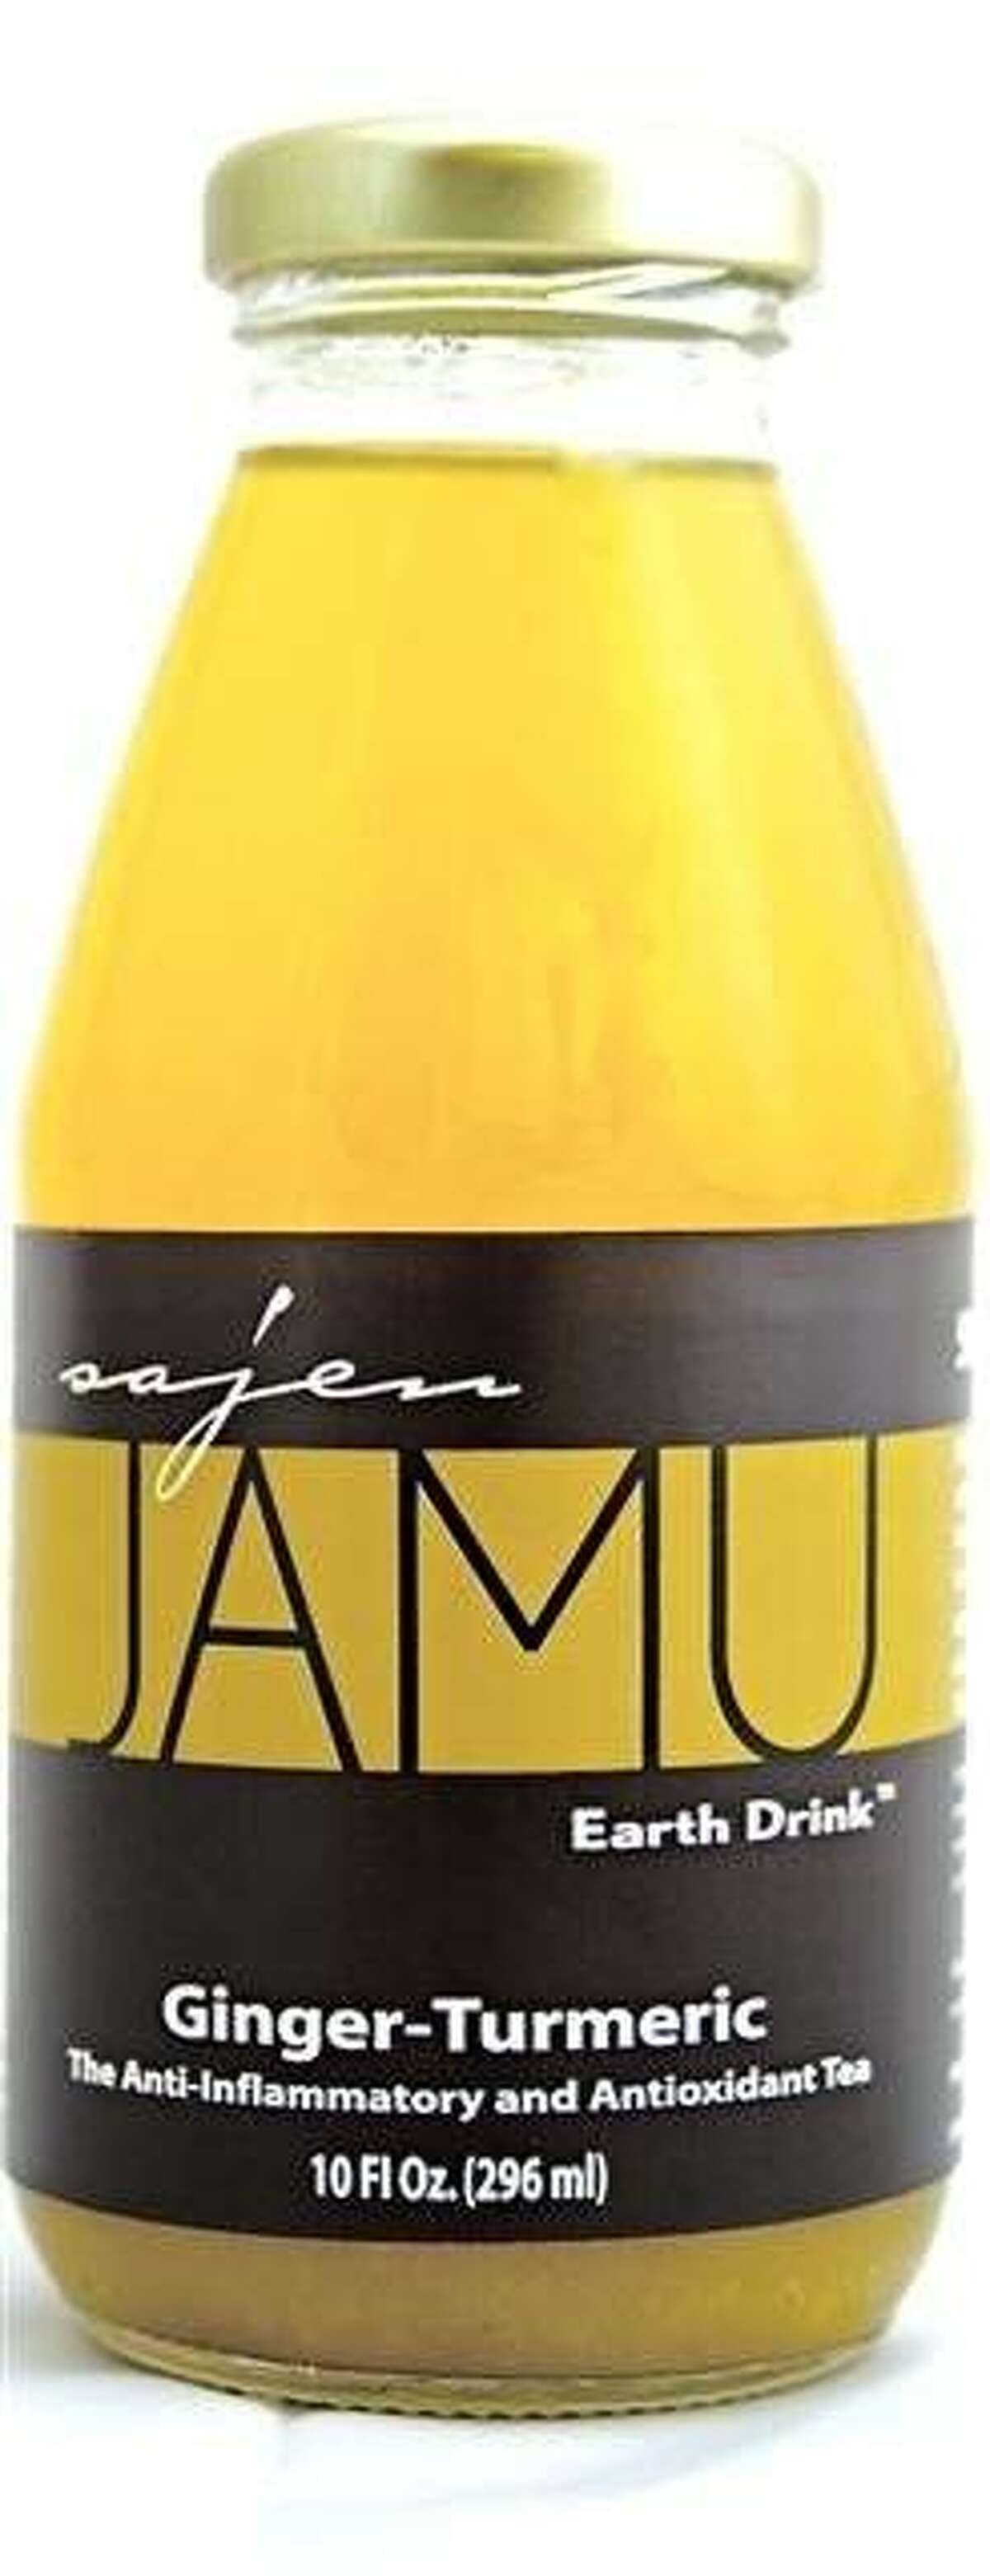 Sajen jamu, made in San Francisco. Jamu is a traditional Balinese drink featured in the book and movie "Eat, Pray, Love."